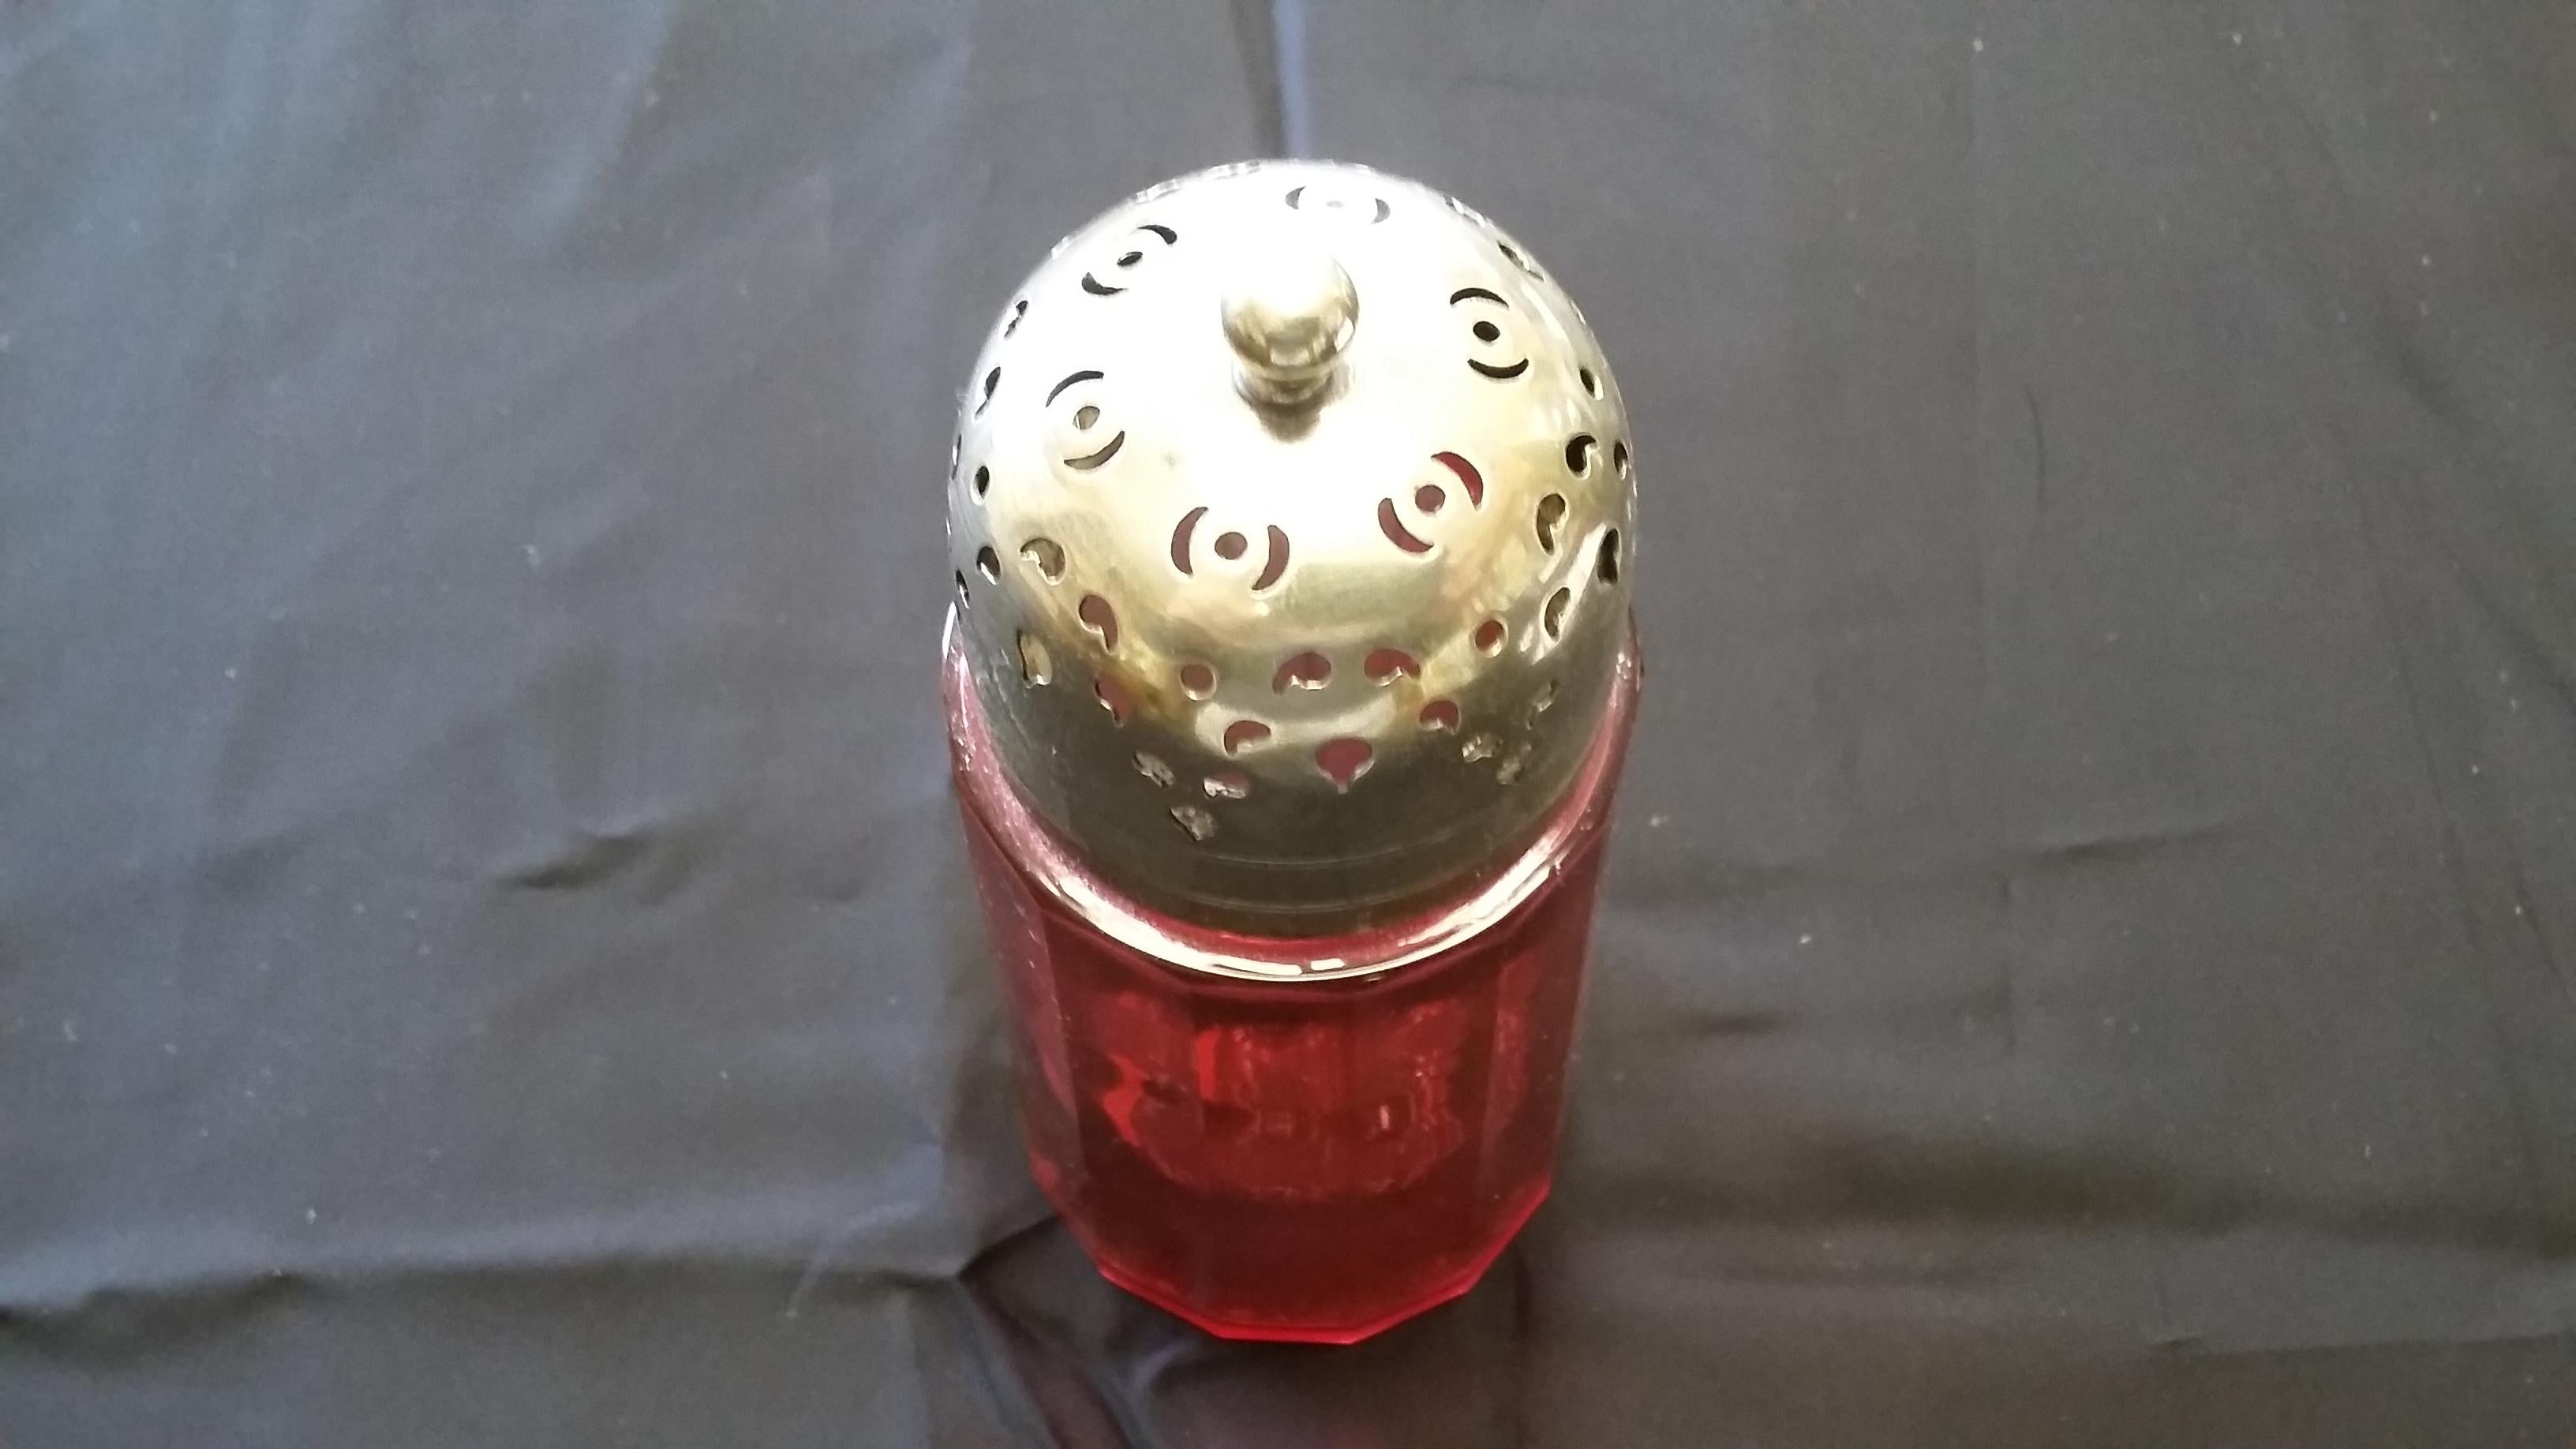 Unique 19th century English sugar shaker. Made of cranberry glass with a silver-plated top. Glass is tapered and beveled. Top is signed EPNS.